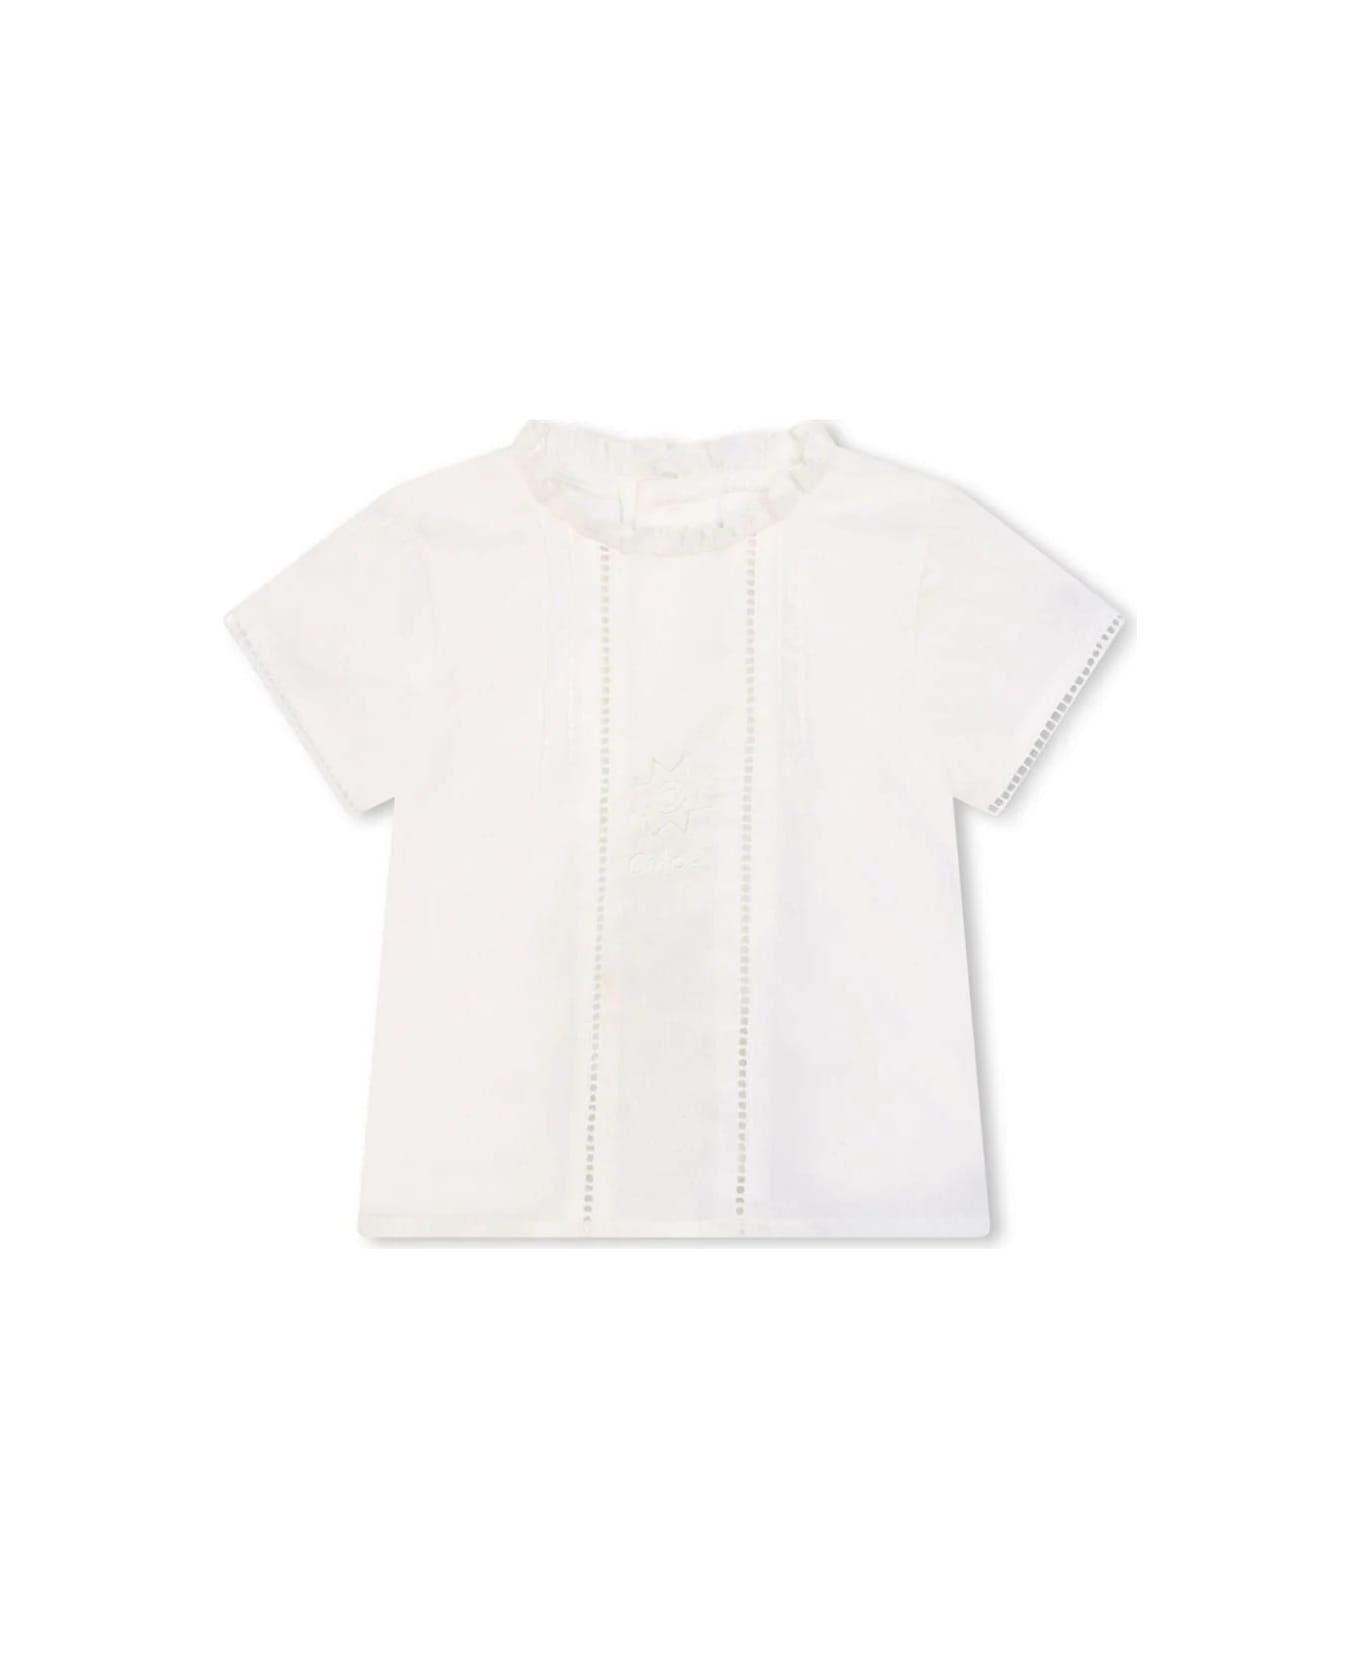 Chloé Halle And Shorts Set - White